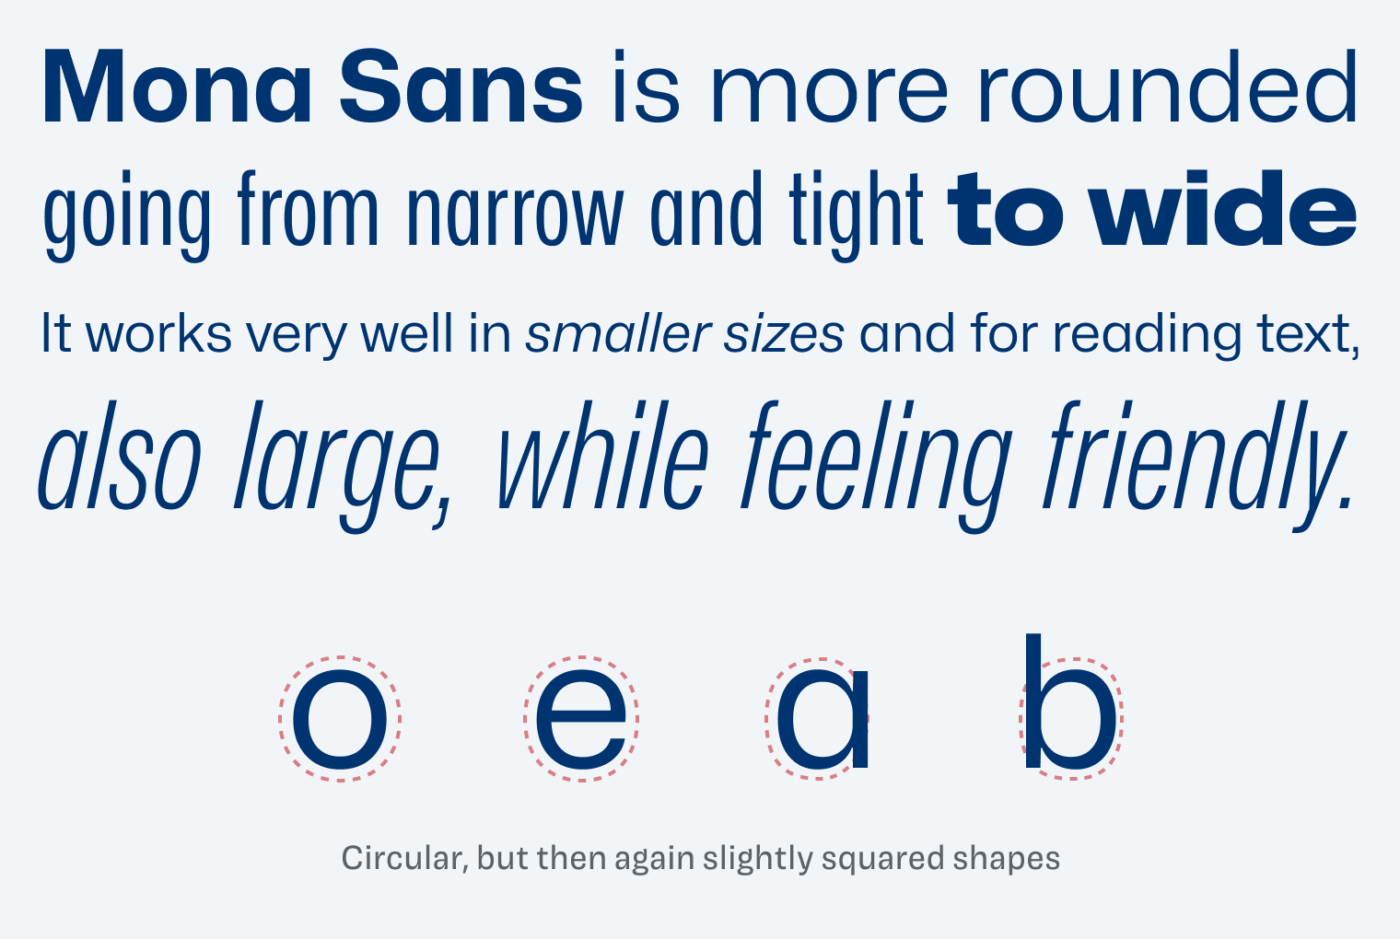 Mona Sans is more rounded going from narrow and tight to wide
It works very well in smaller sizes and for reading text,
also large, while feeling friendly.
Circular, but then again slightly squared shapes